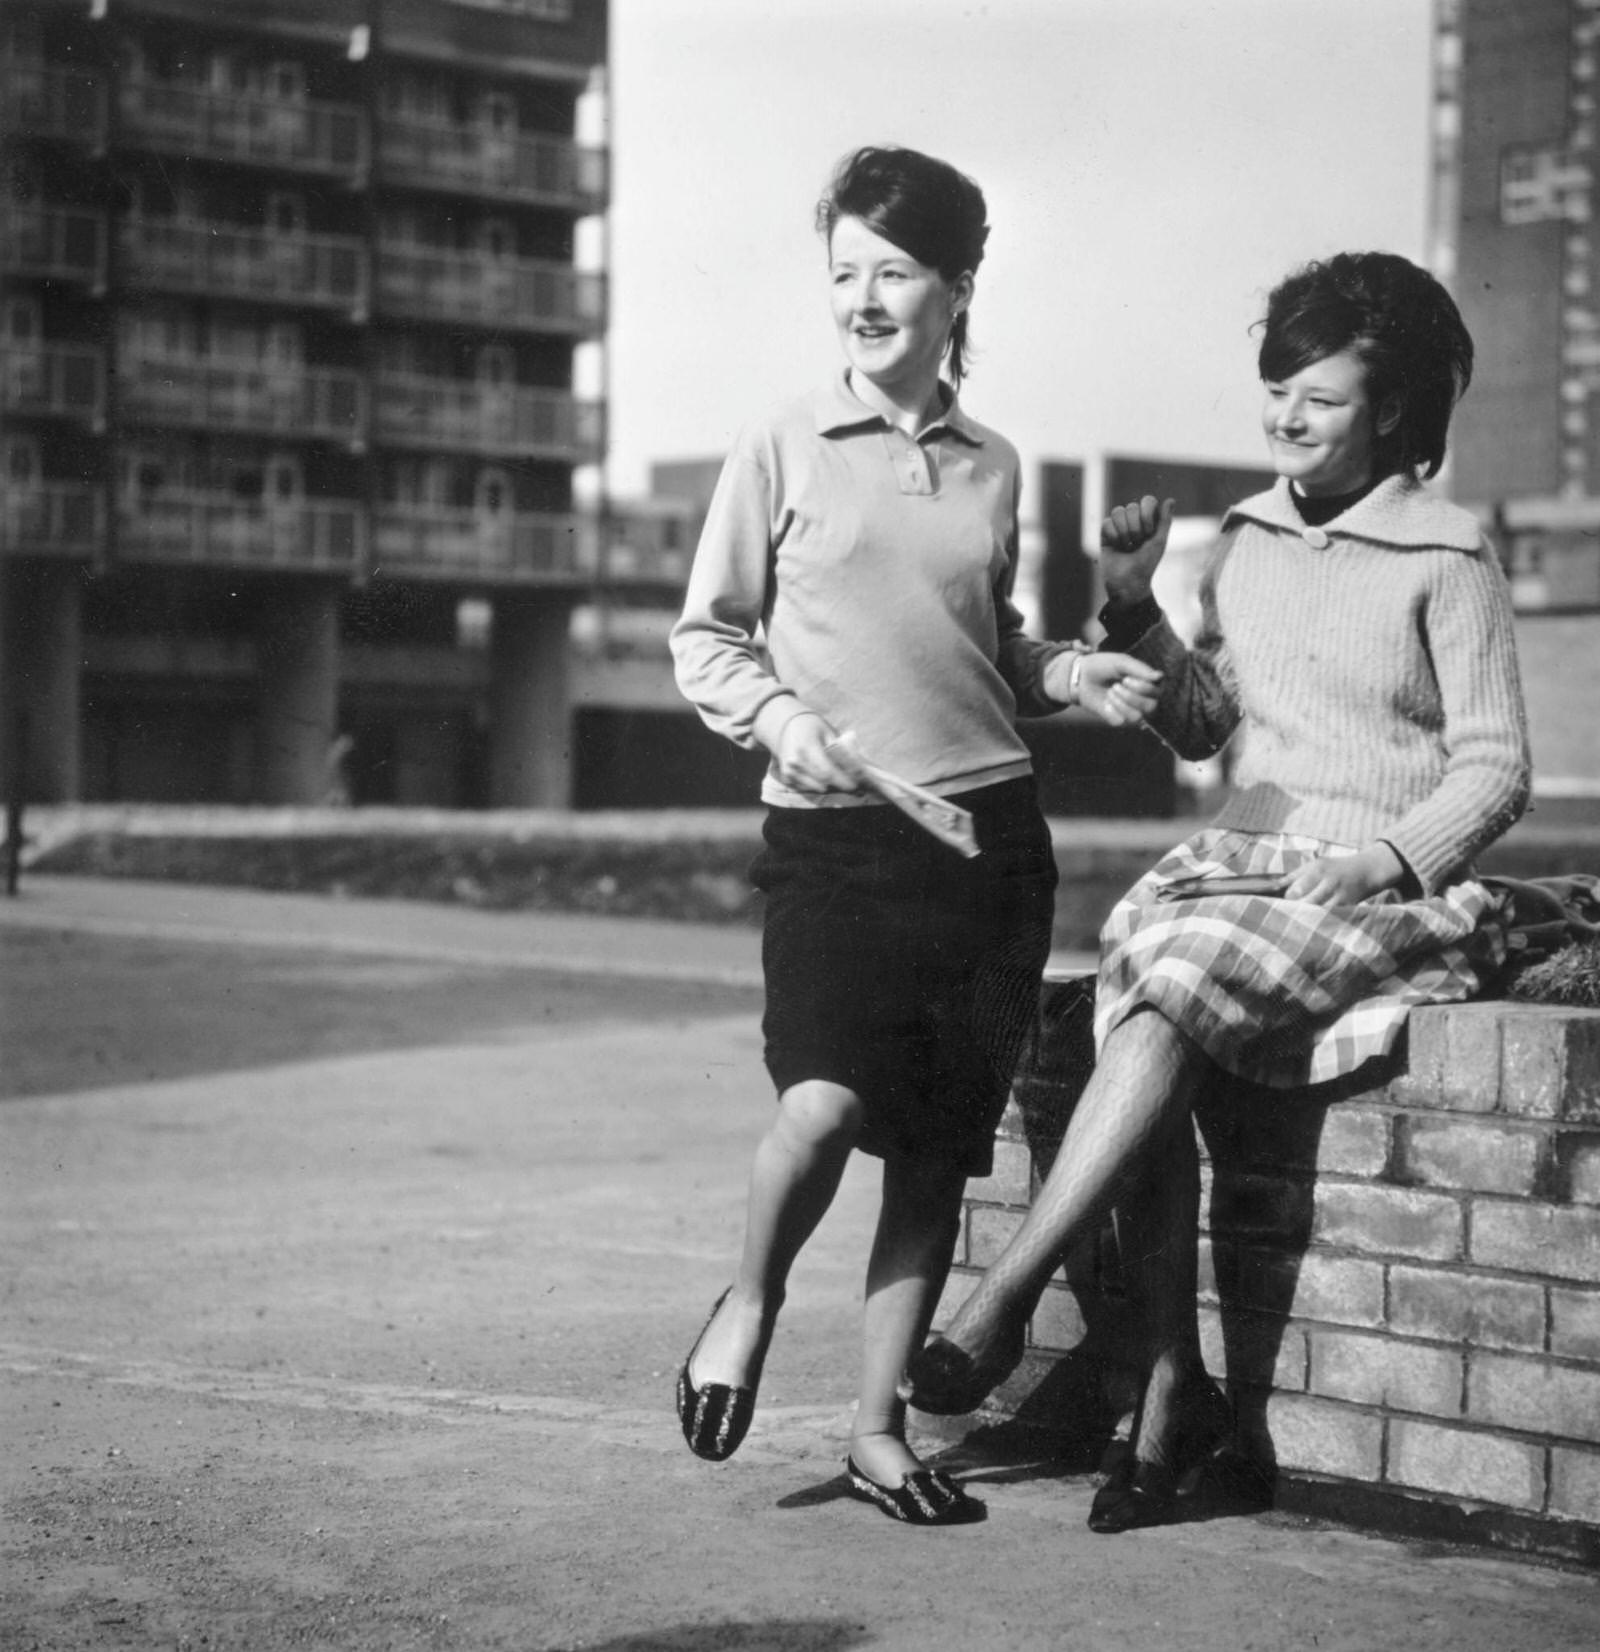 Beatles fan Ann and her sister Eileen dance the twist in a housing estate in the Gorbals area of Glasgow, 1966